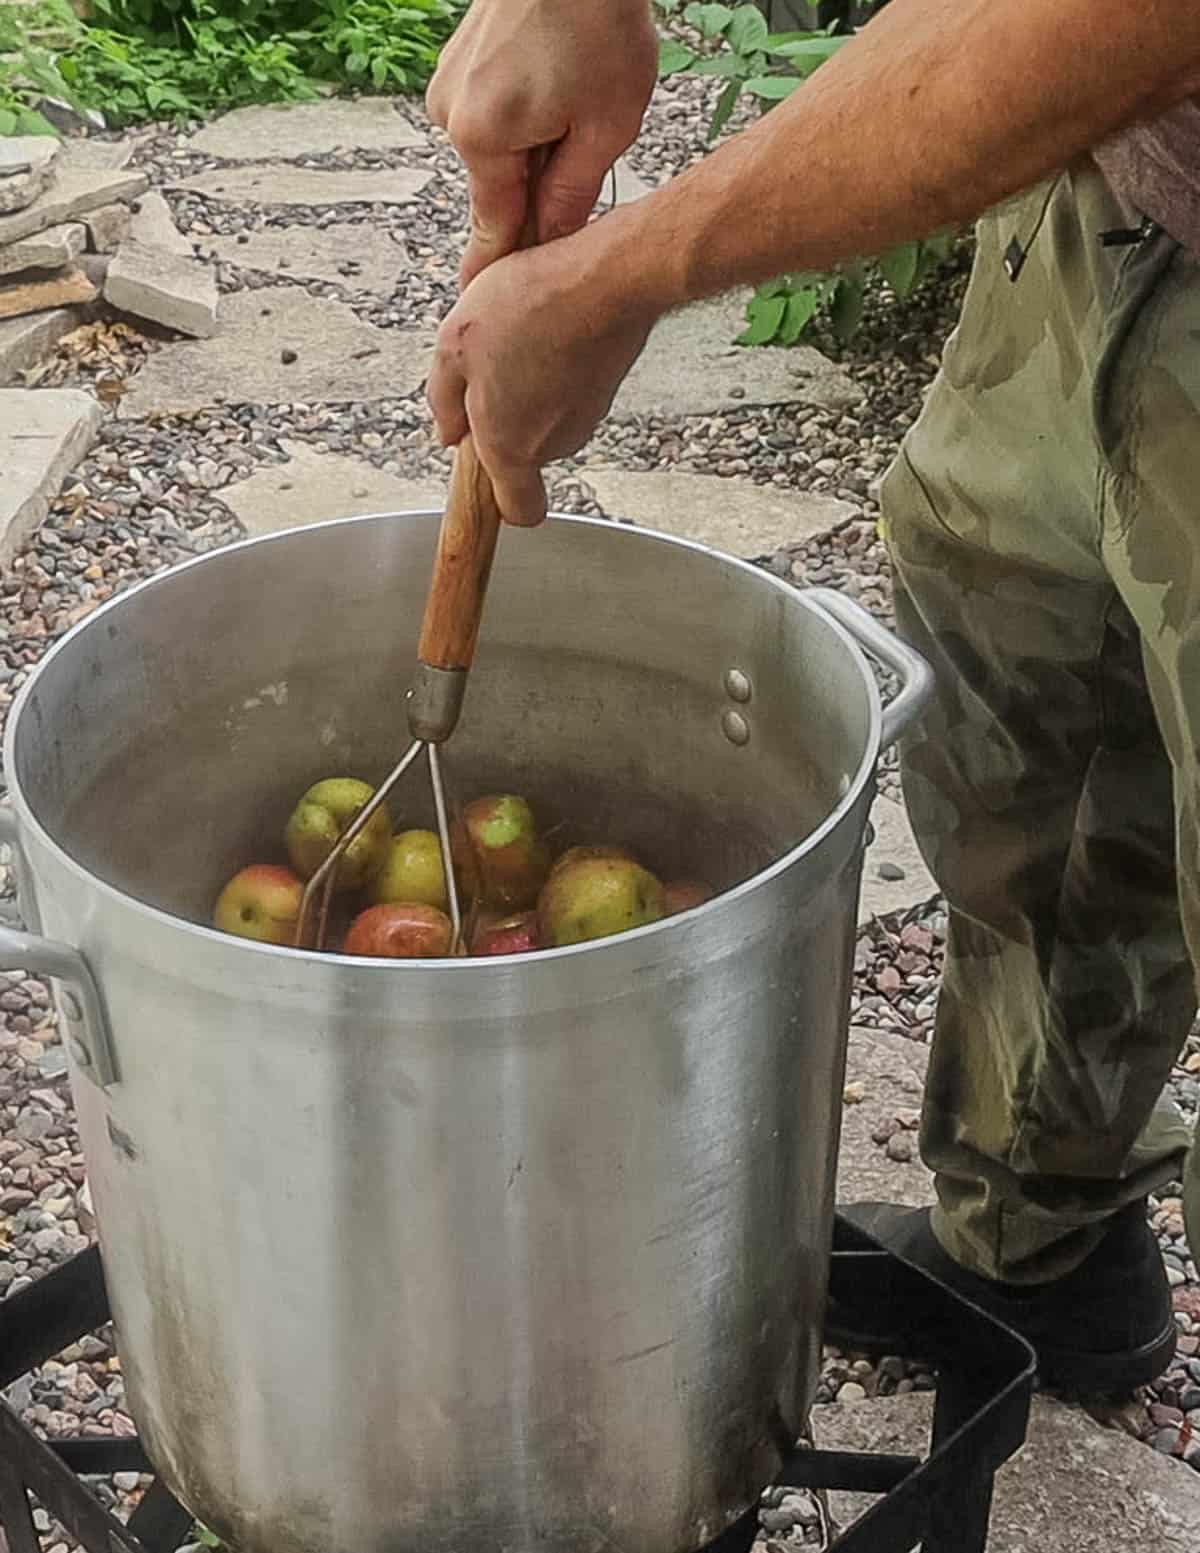 Mashing cooked apples with a potato masher.